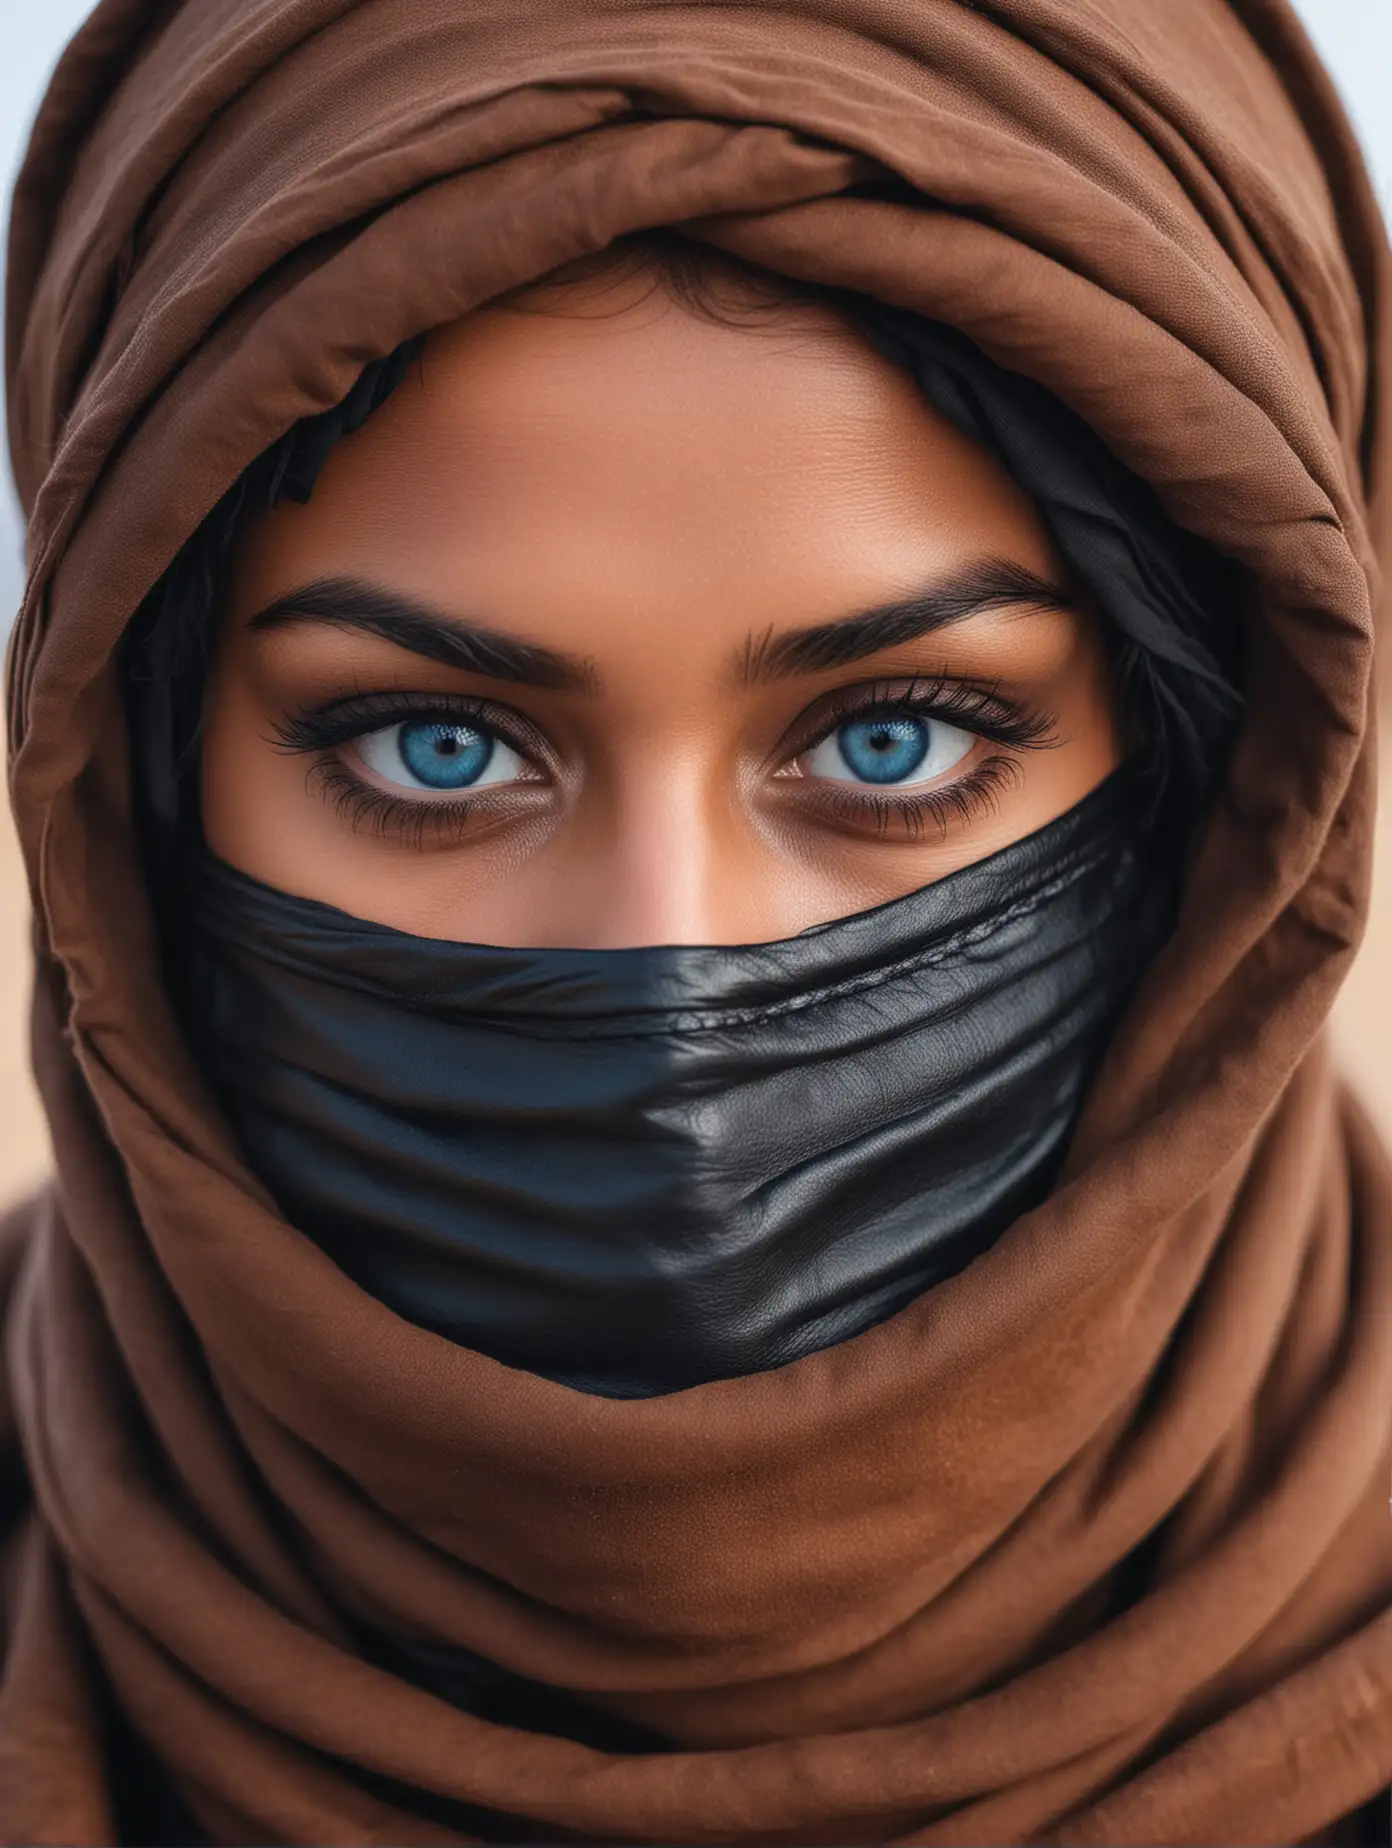 dark-skinned woman with blue-on-blue eyes (blue sclera), wearing brown leather and a black Dune-style breathing mask covering her lower face and a dust scarf over her head